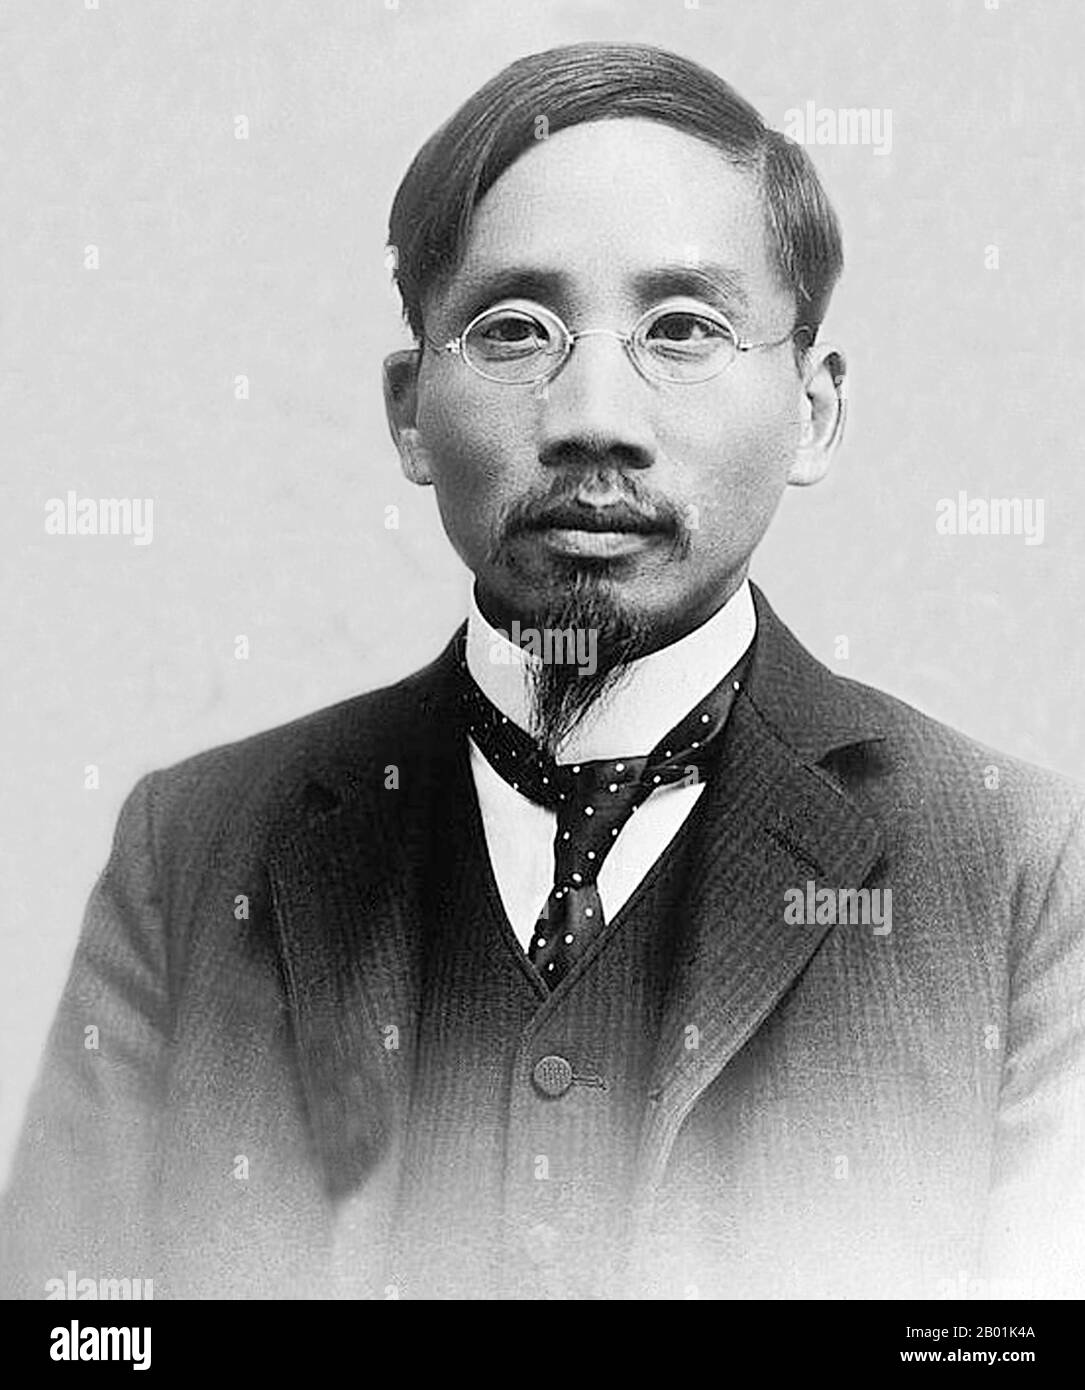 China: Cai Yuanpei (11 January 1868 - 5 March 1940), educator, reformist and revolutionary thinker, c. 1910-1915.  Cai Yuanpei , also spelt Tsai Yuan-Pei/Tsai Yuan-Bet, was a Chinese educator, philosopher, politician, Esperantist and the president of Peking University. He was known for his critical evaluation of Chinese culture that led to the influential May Fourth Movement. In his thinking, Cai was heavily influenced by Anarchism, and he was also involved in the feminist and New Culture Movements. Stock Photo